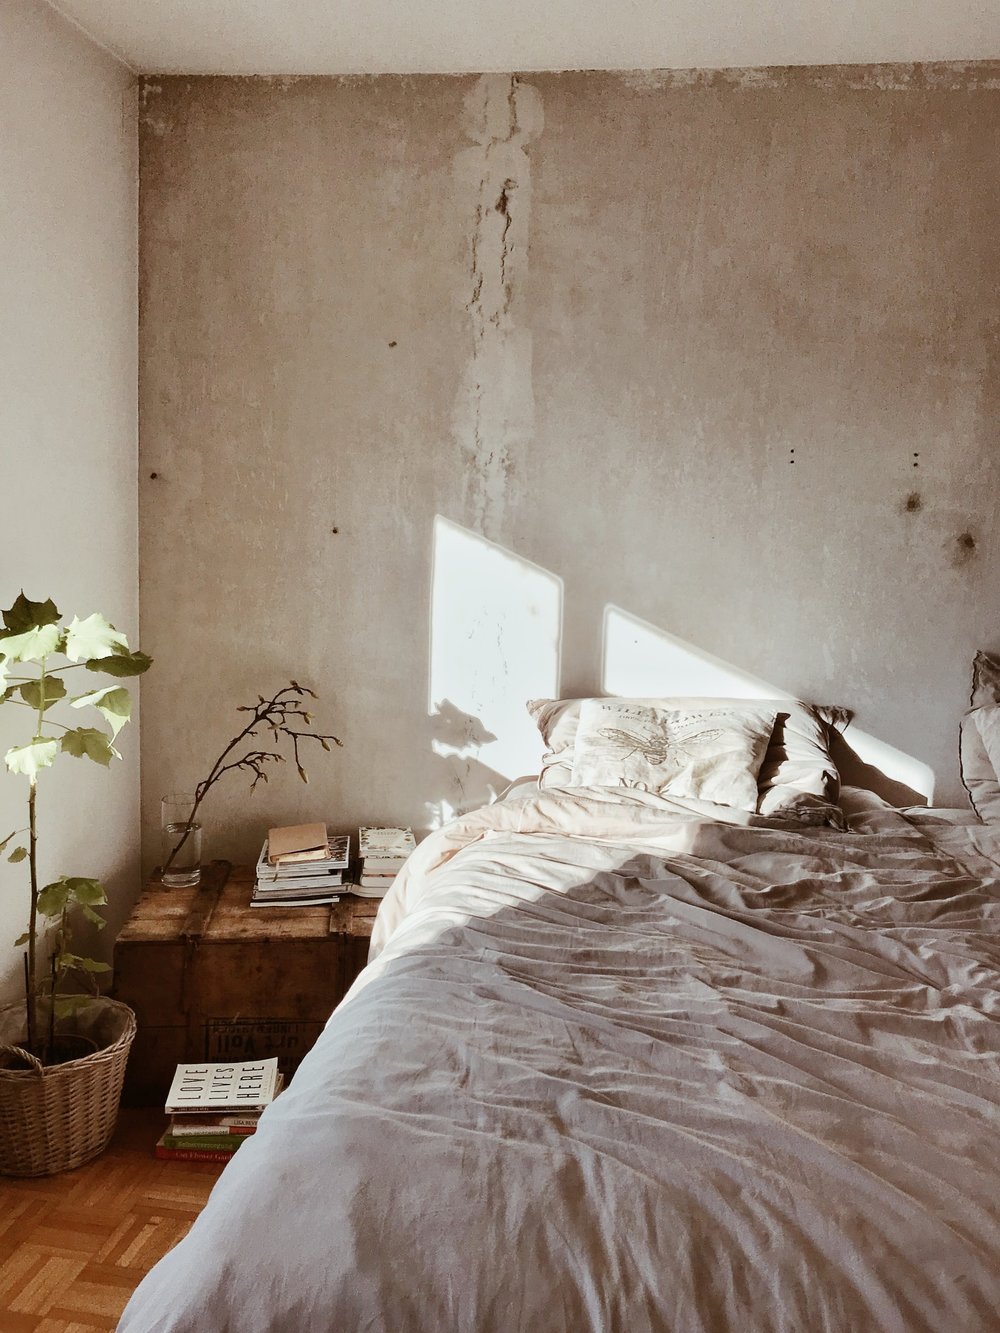 10 Items That You Must Have In Your Bedroom